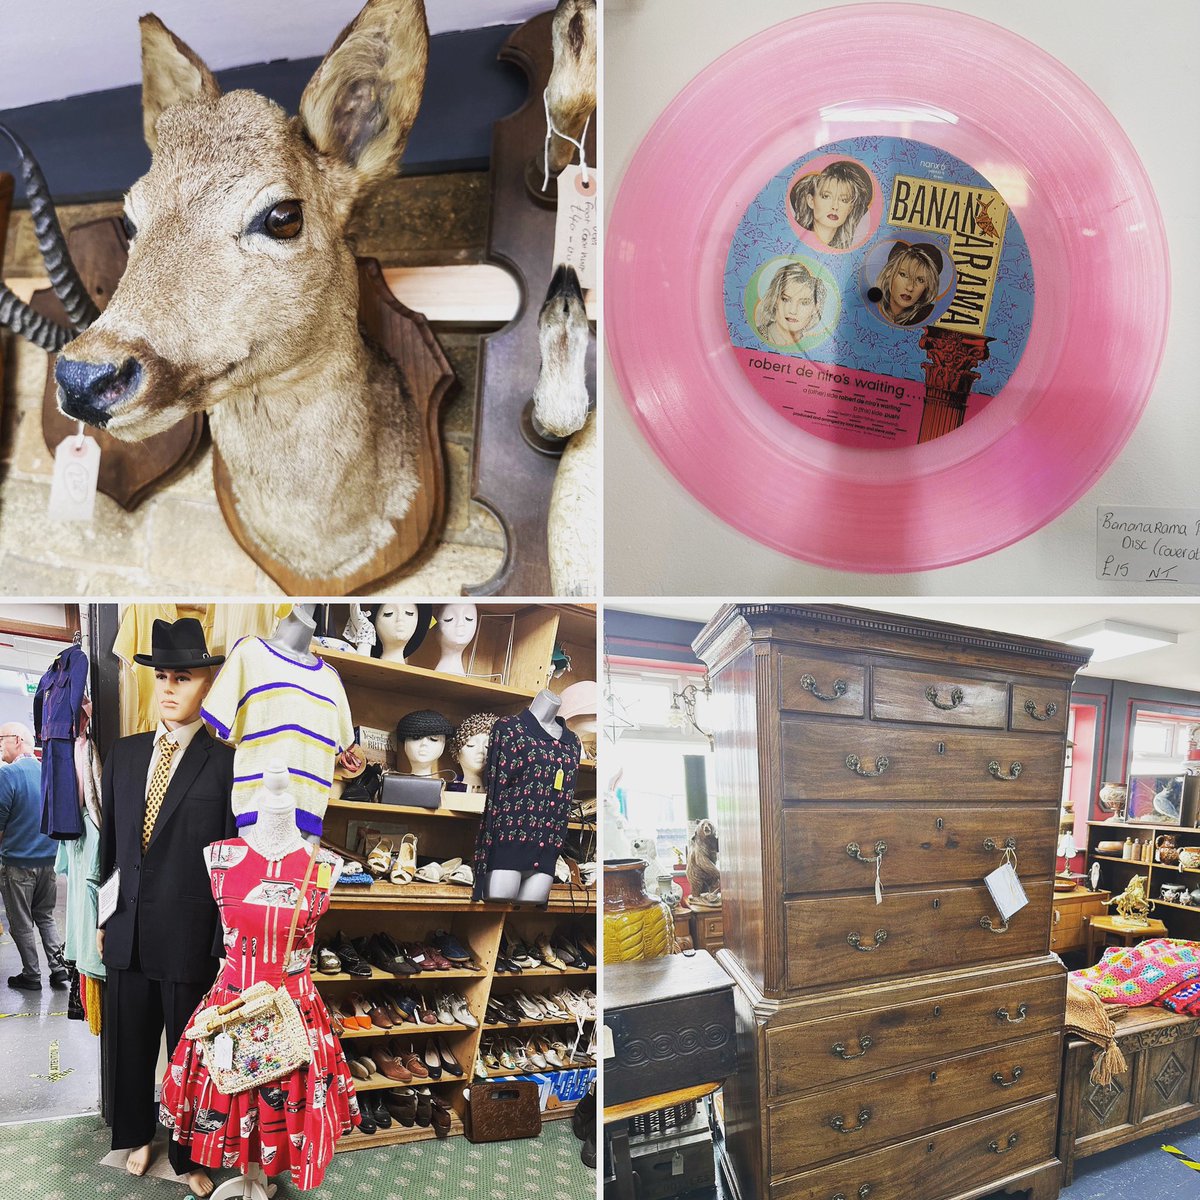 We are getting ready to open 10-5 pm. Don’t forget if your visiting the Car boot then pop in and see us. #hemswell #antiques #antiquescentre #antiquesforsaleinlincolnshire #taxidermy #vinyl #picturedisc #bananarama #traditionalfurniture #vintageclothes #hemswell #lincolnshire